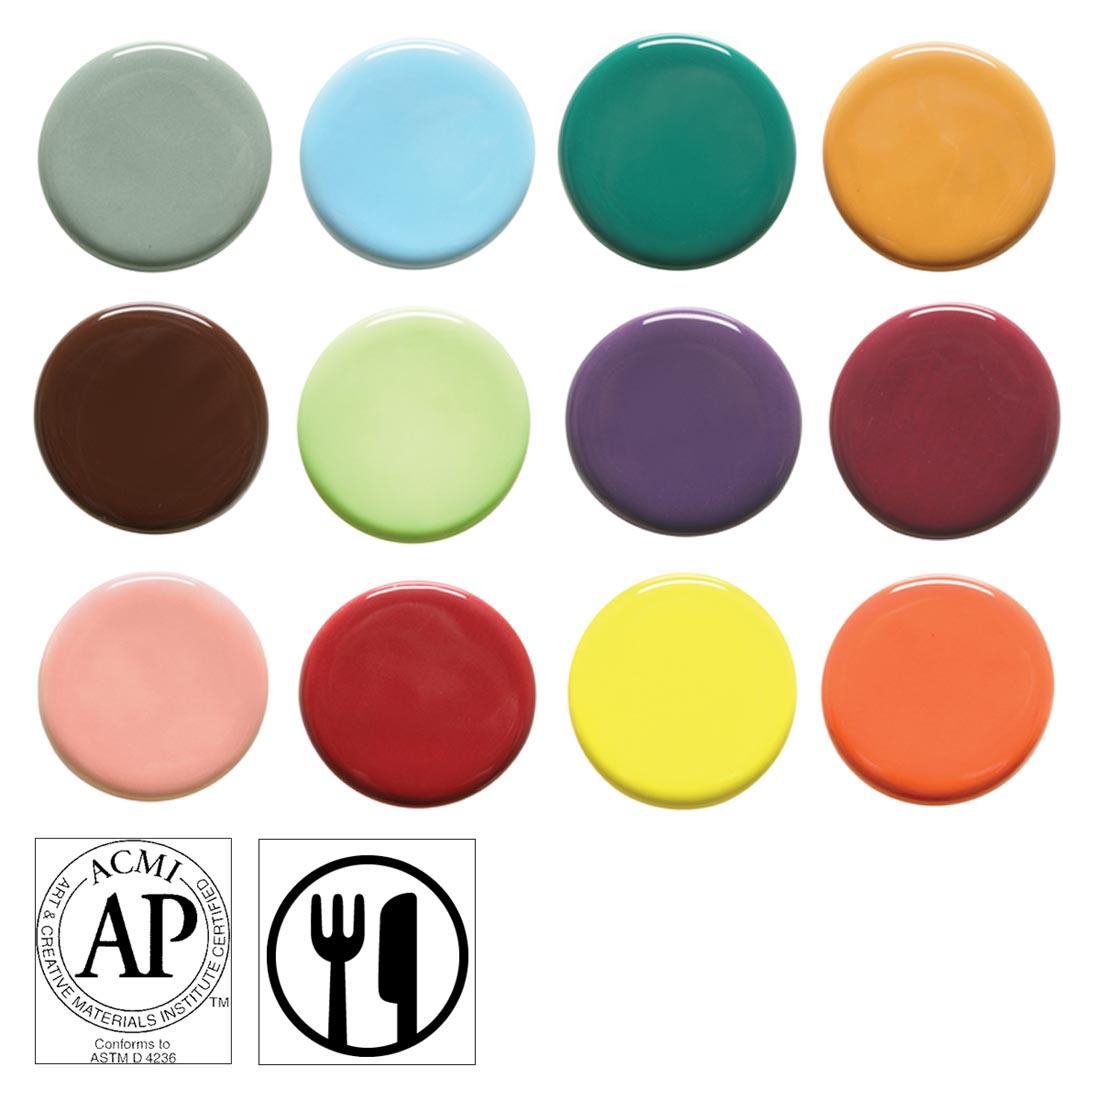 clay tiles with AMACO Teacher's Palette Gloss Glazes applied; symbols for AP Seal and food safe